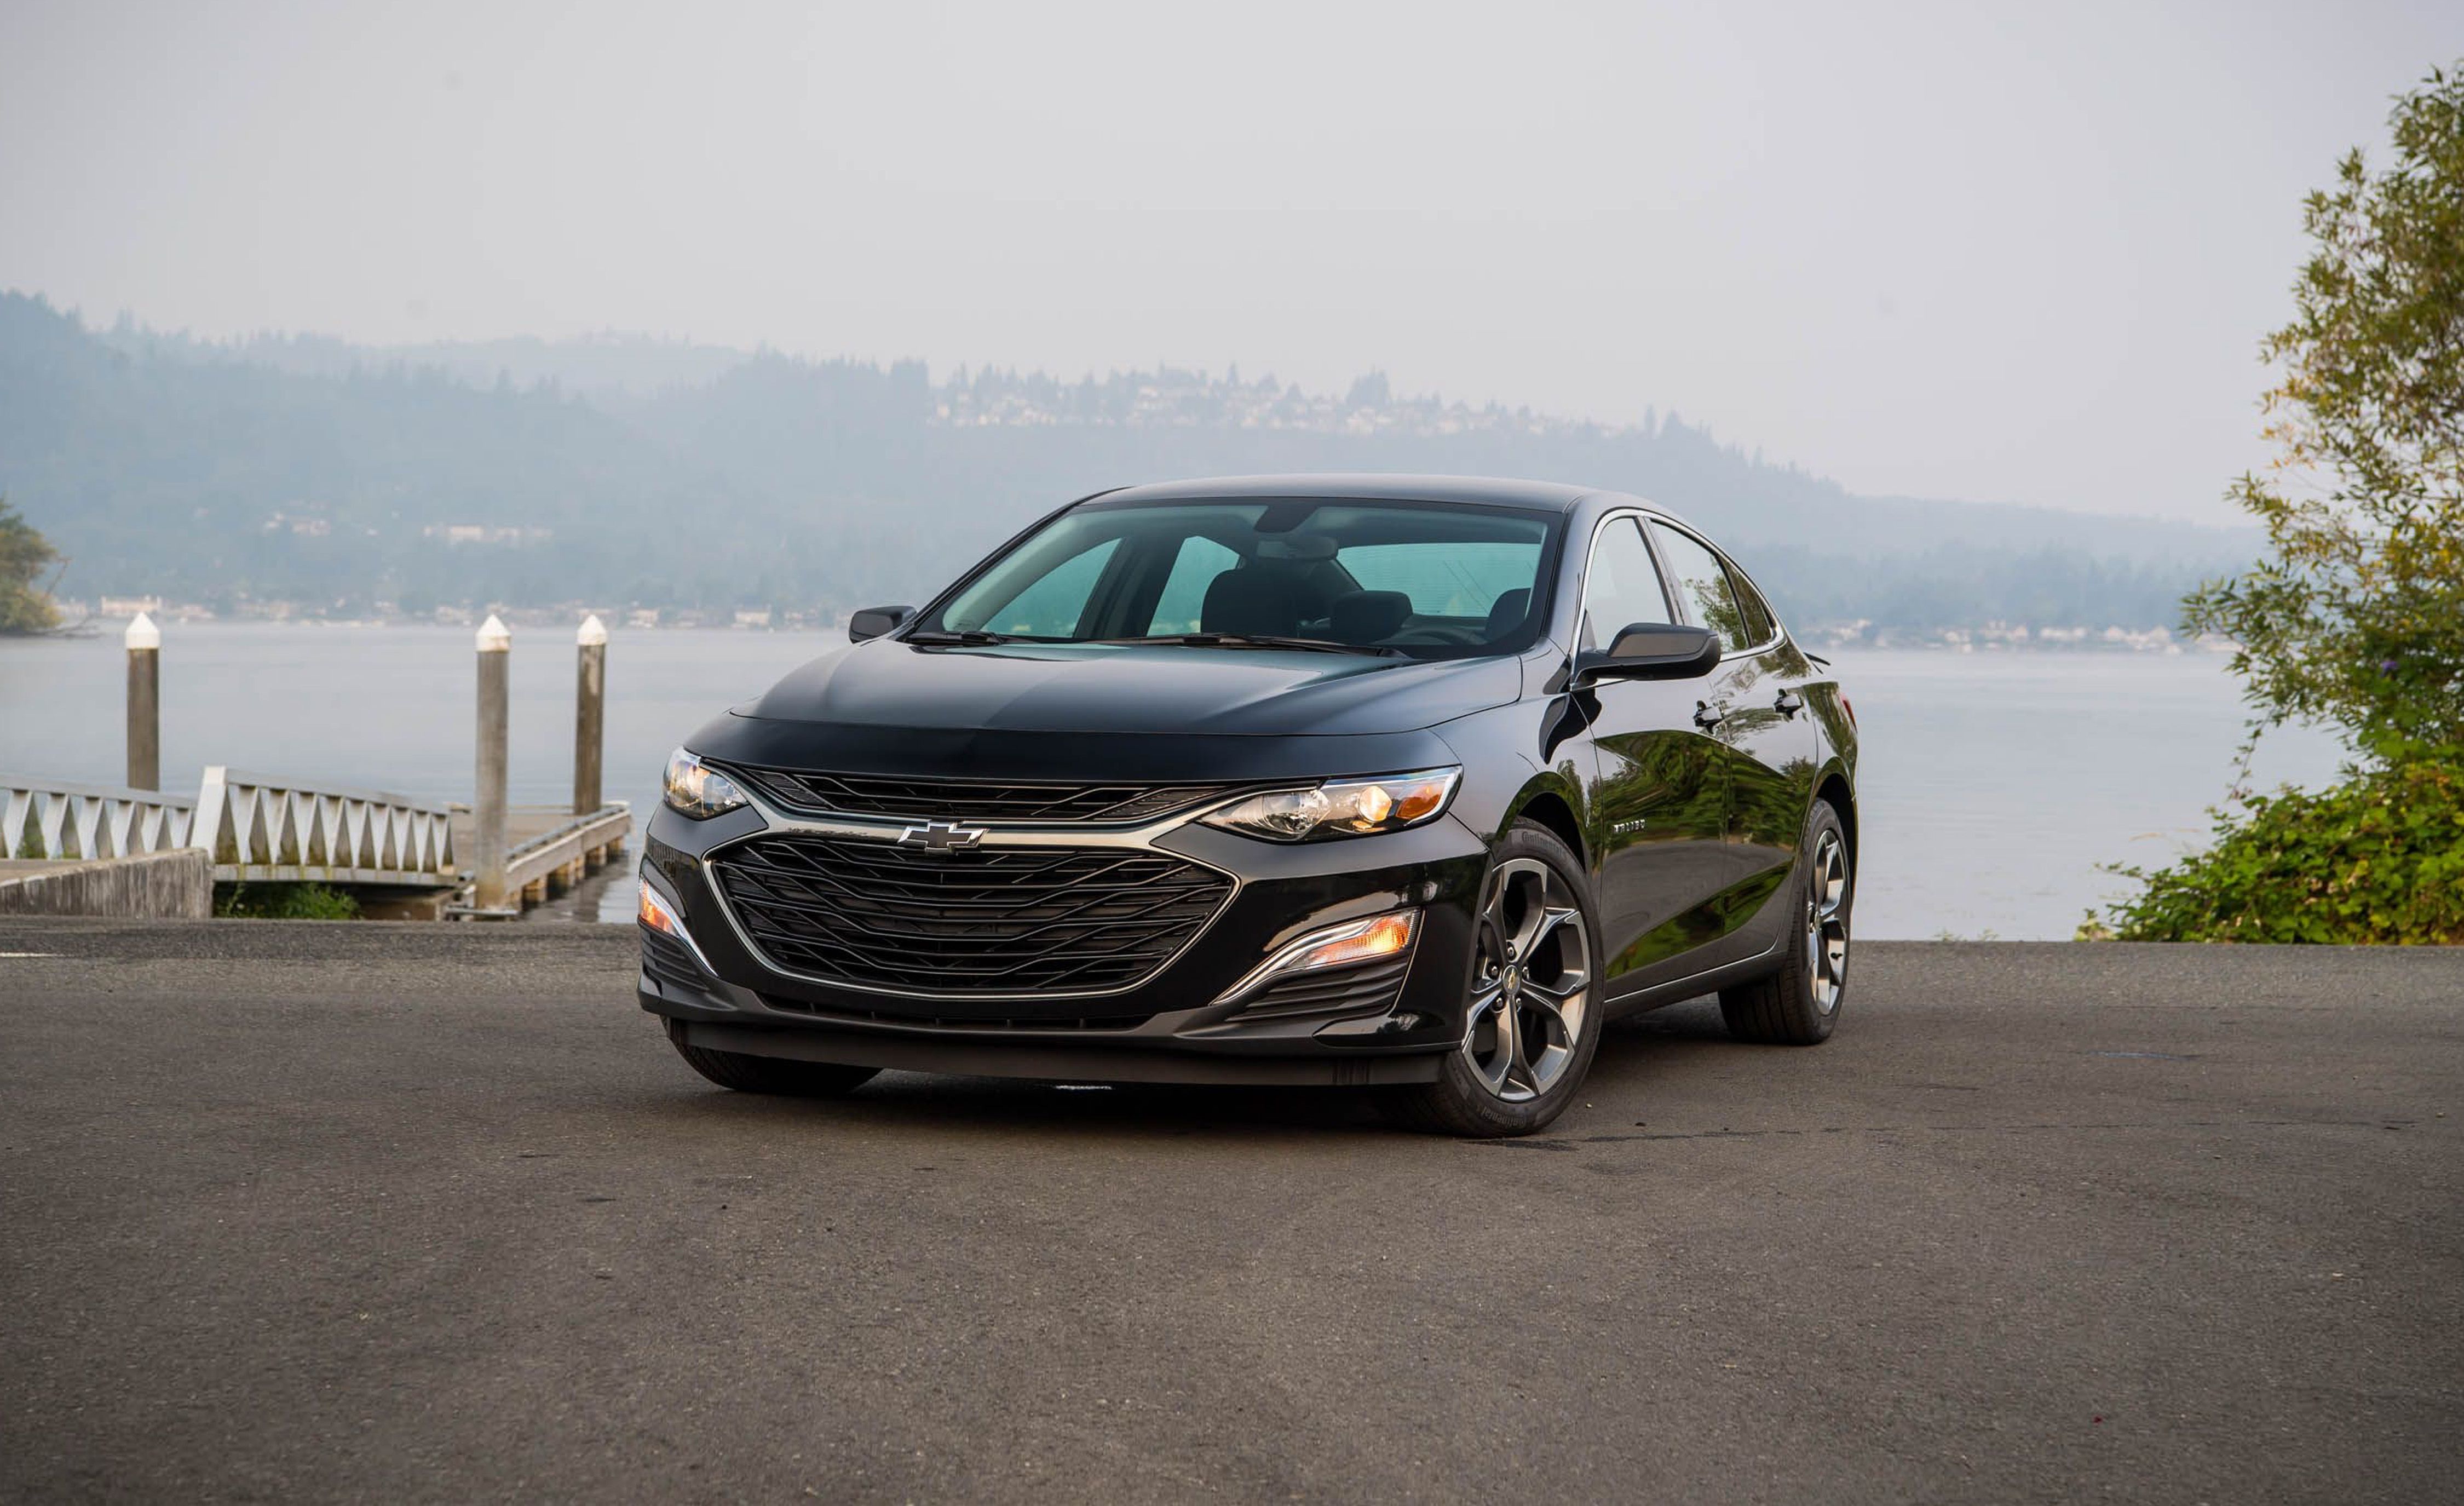 2019 Chevrolet Malibu Review, Pricing, and Specs